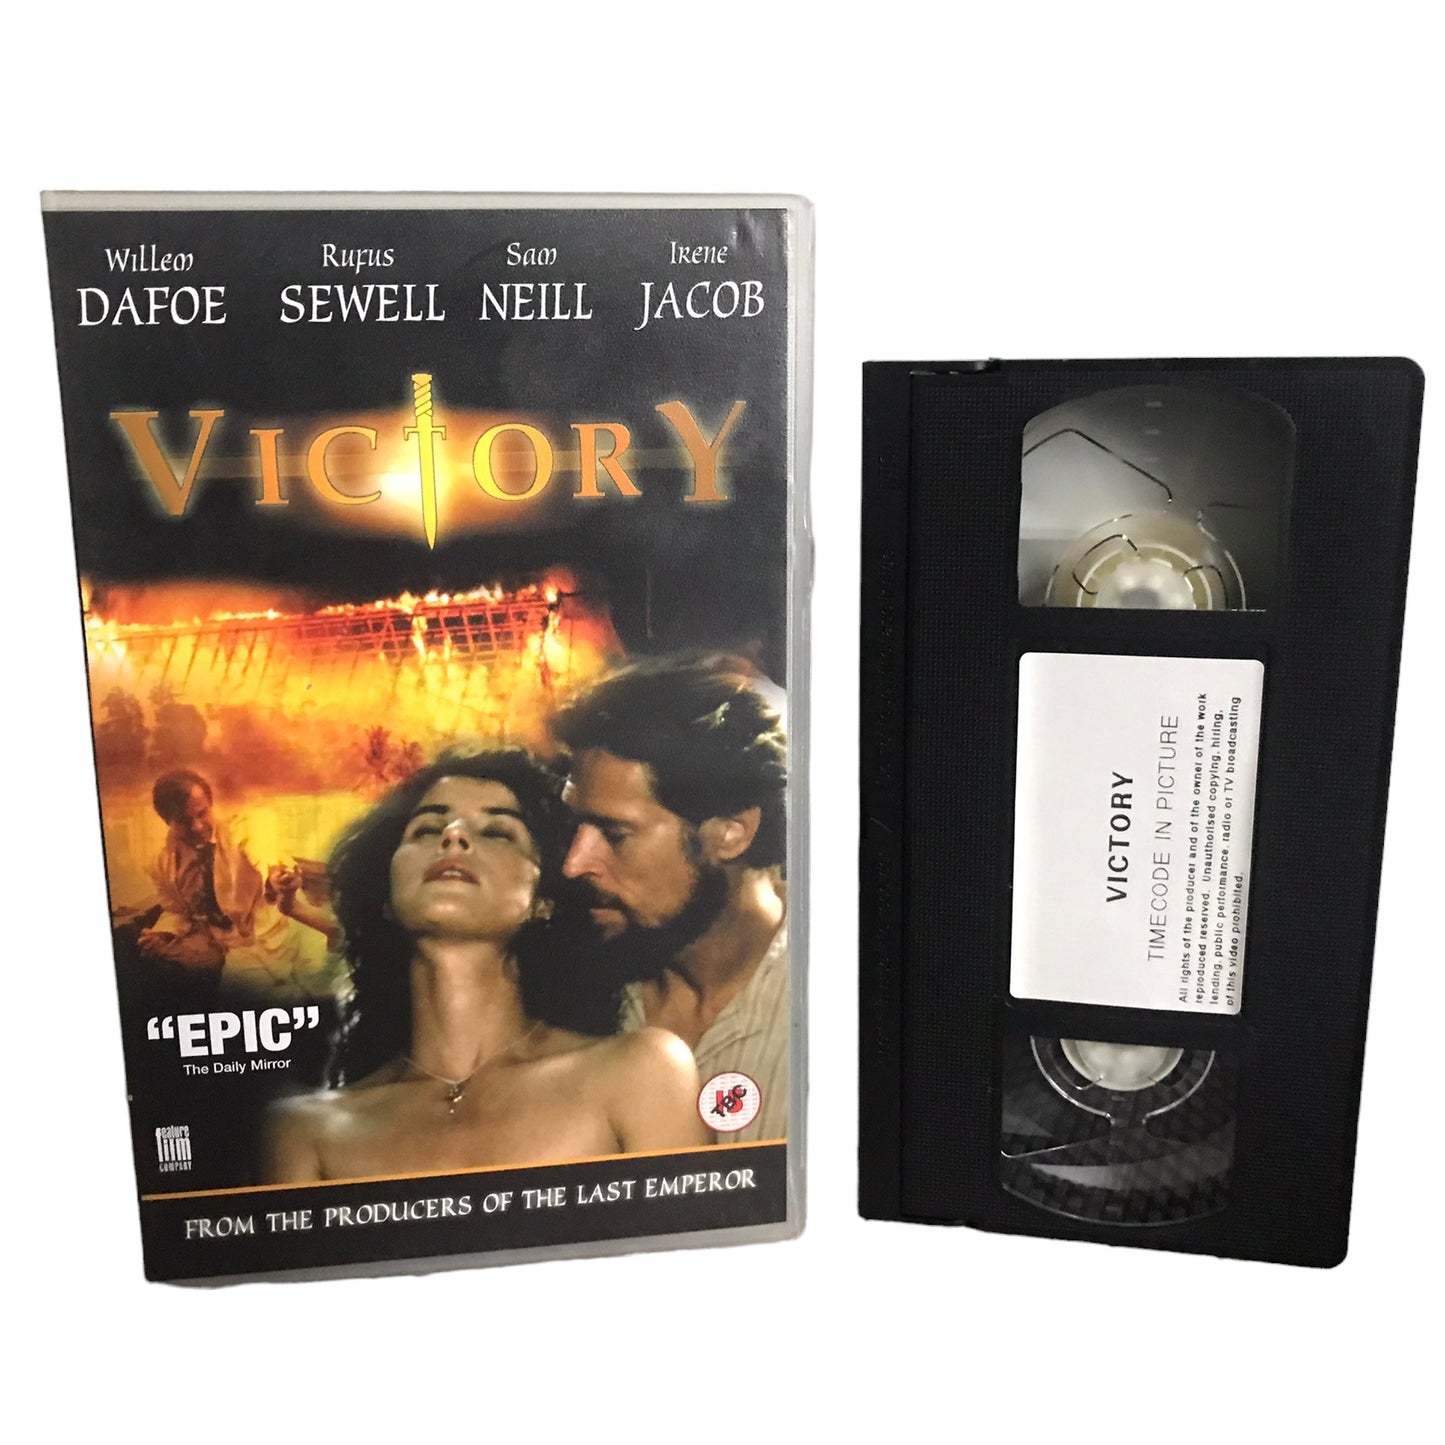 Victory - William Dafoe - Feature Film Company - Large Box - Pal - VHS-